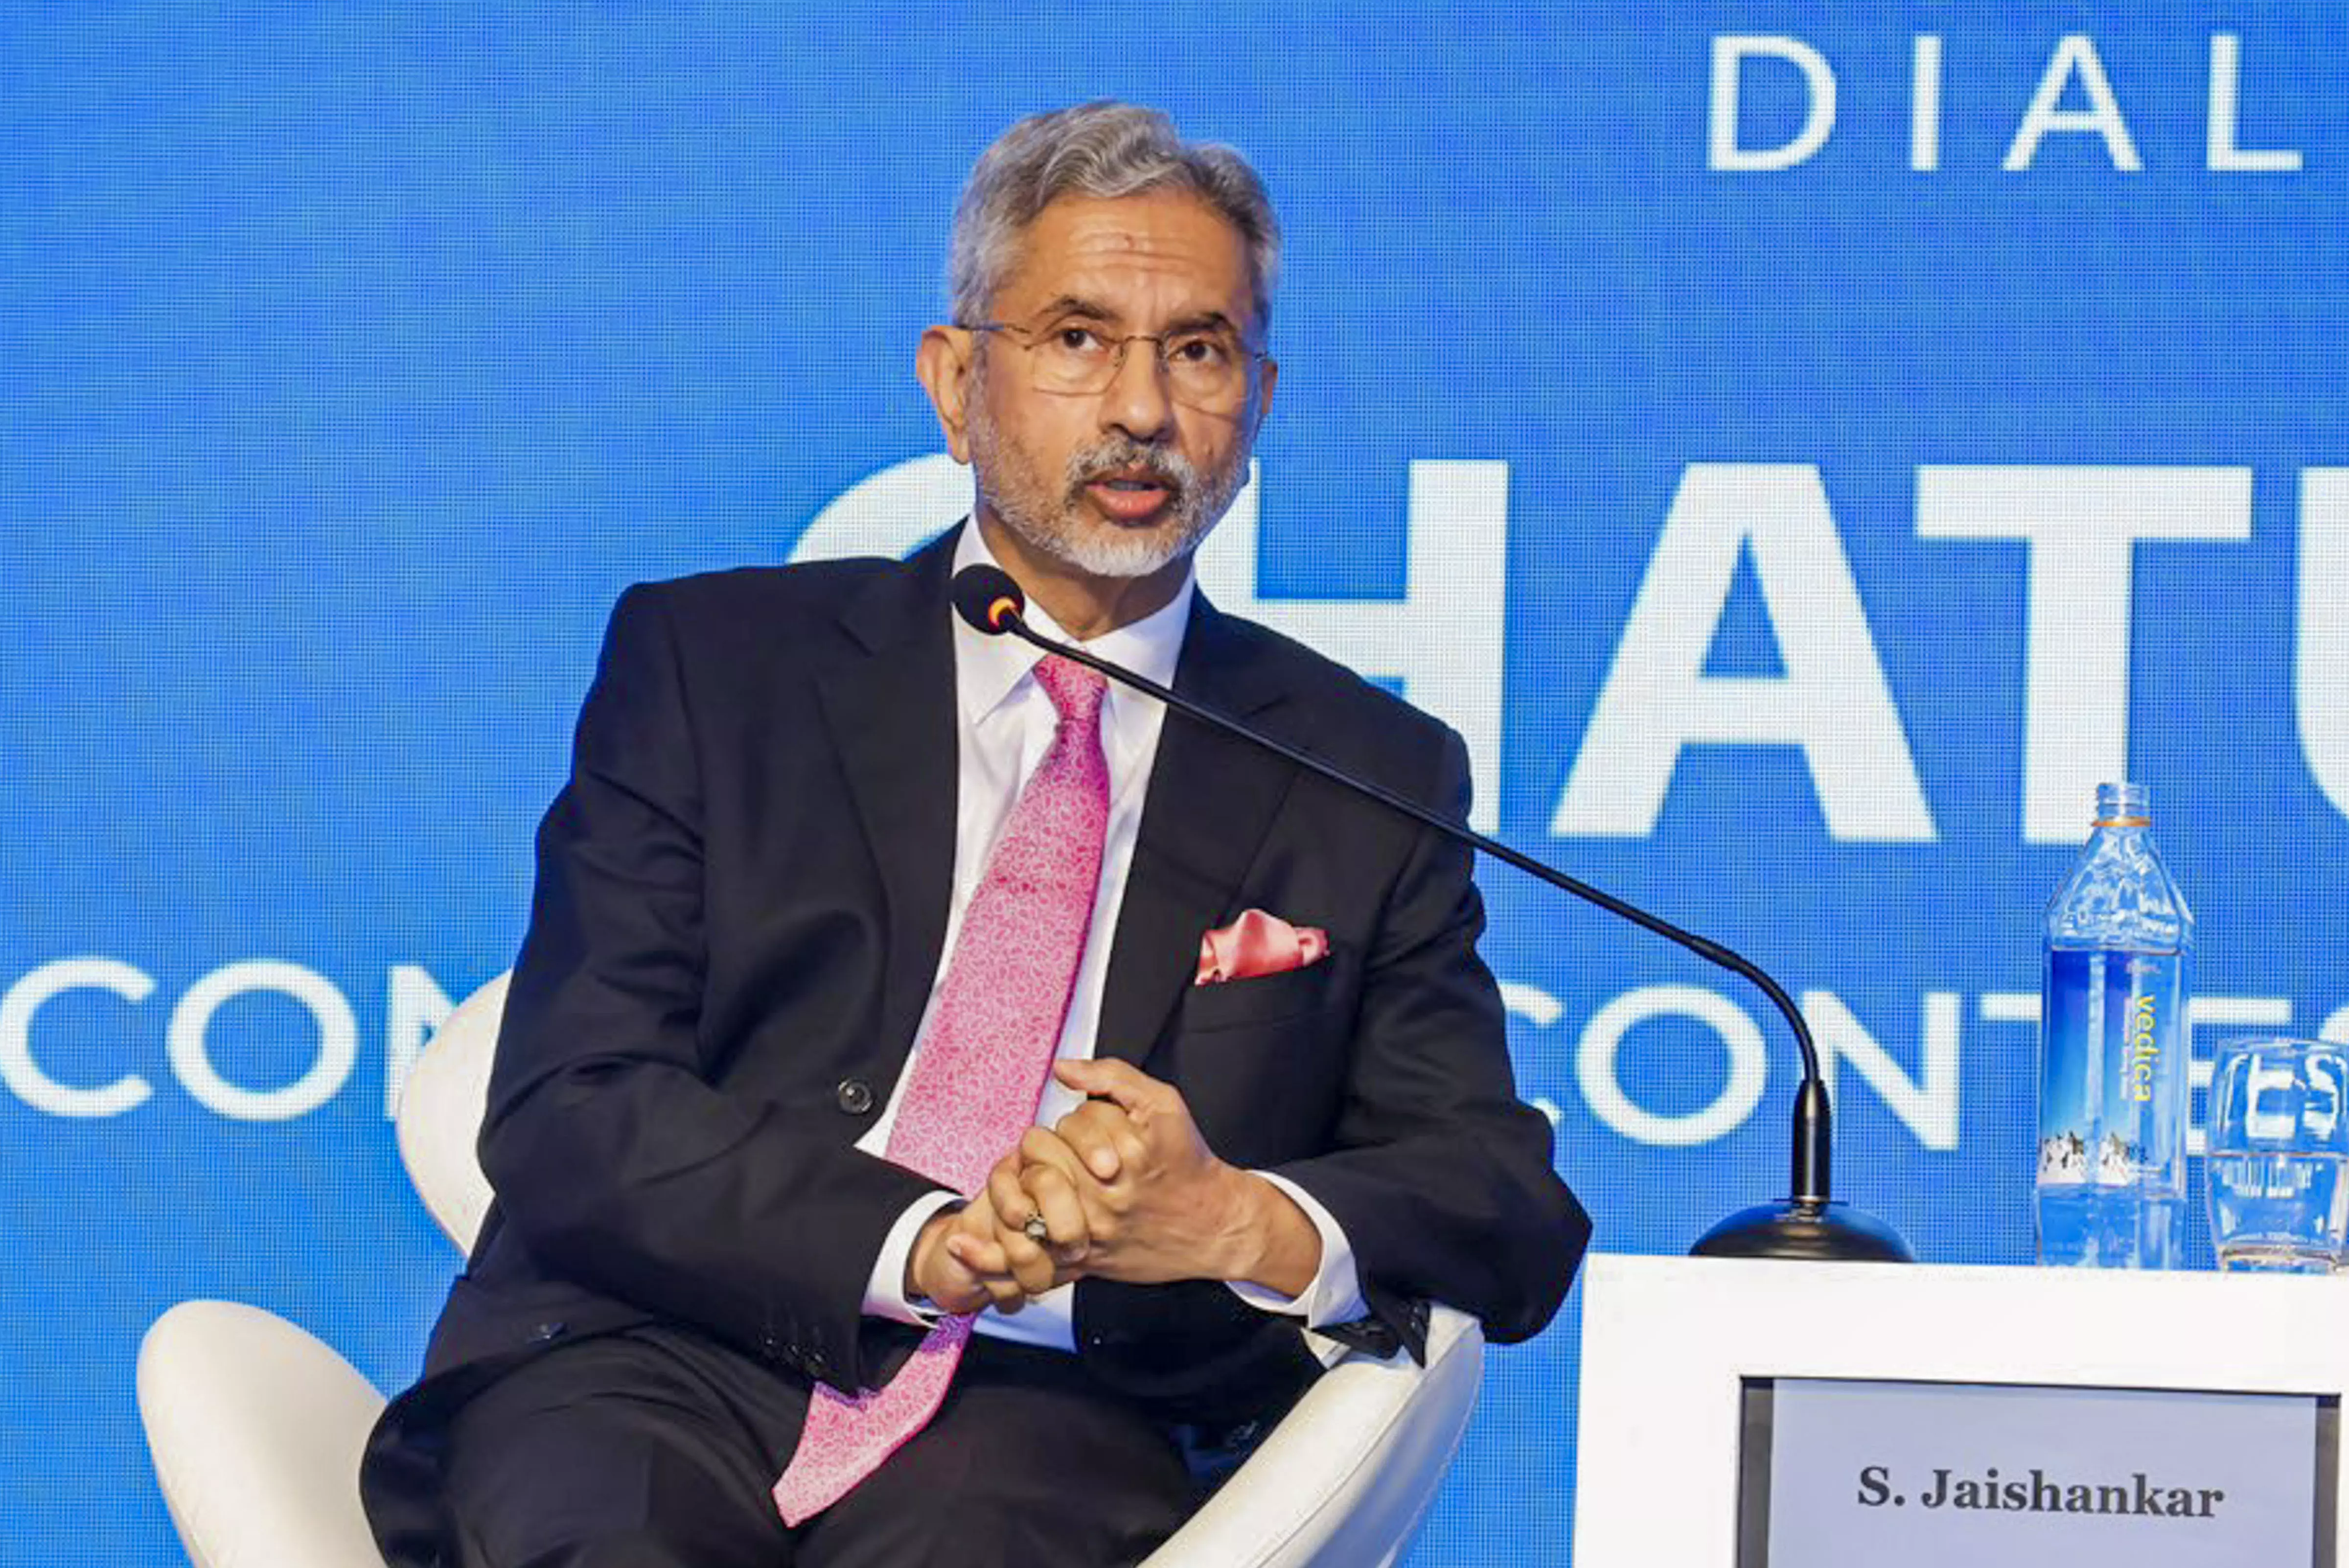 India expects action against culprits involved in attacks on Indian diplomats: Jaishankar